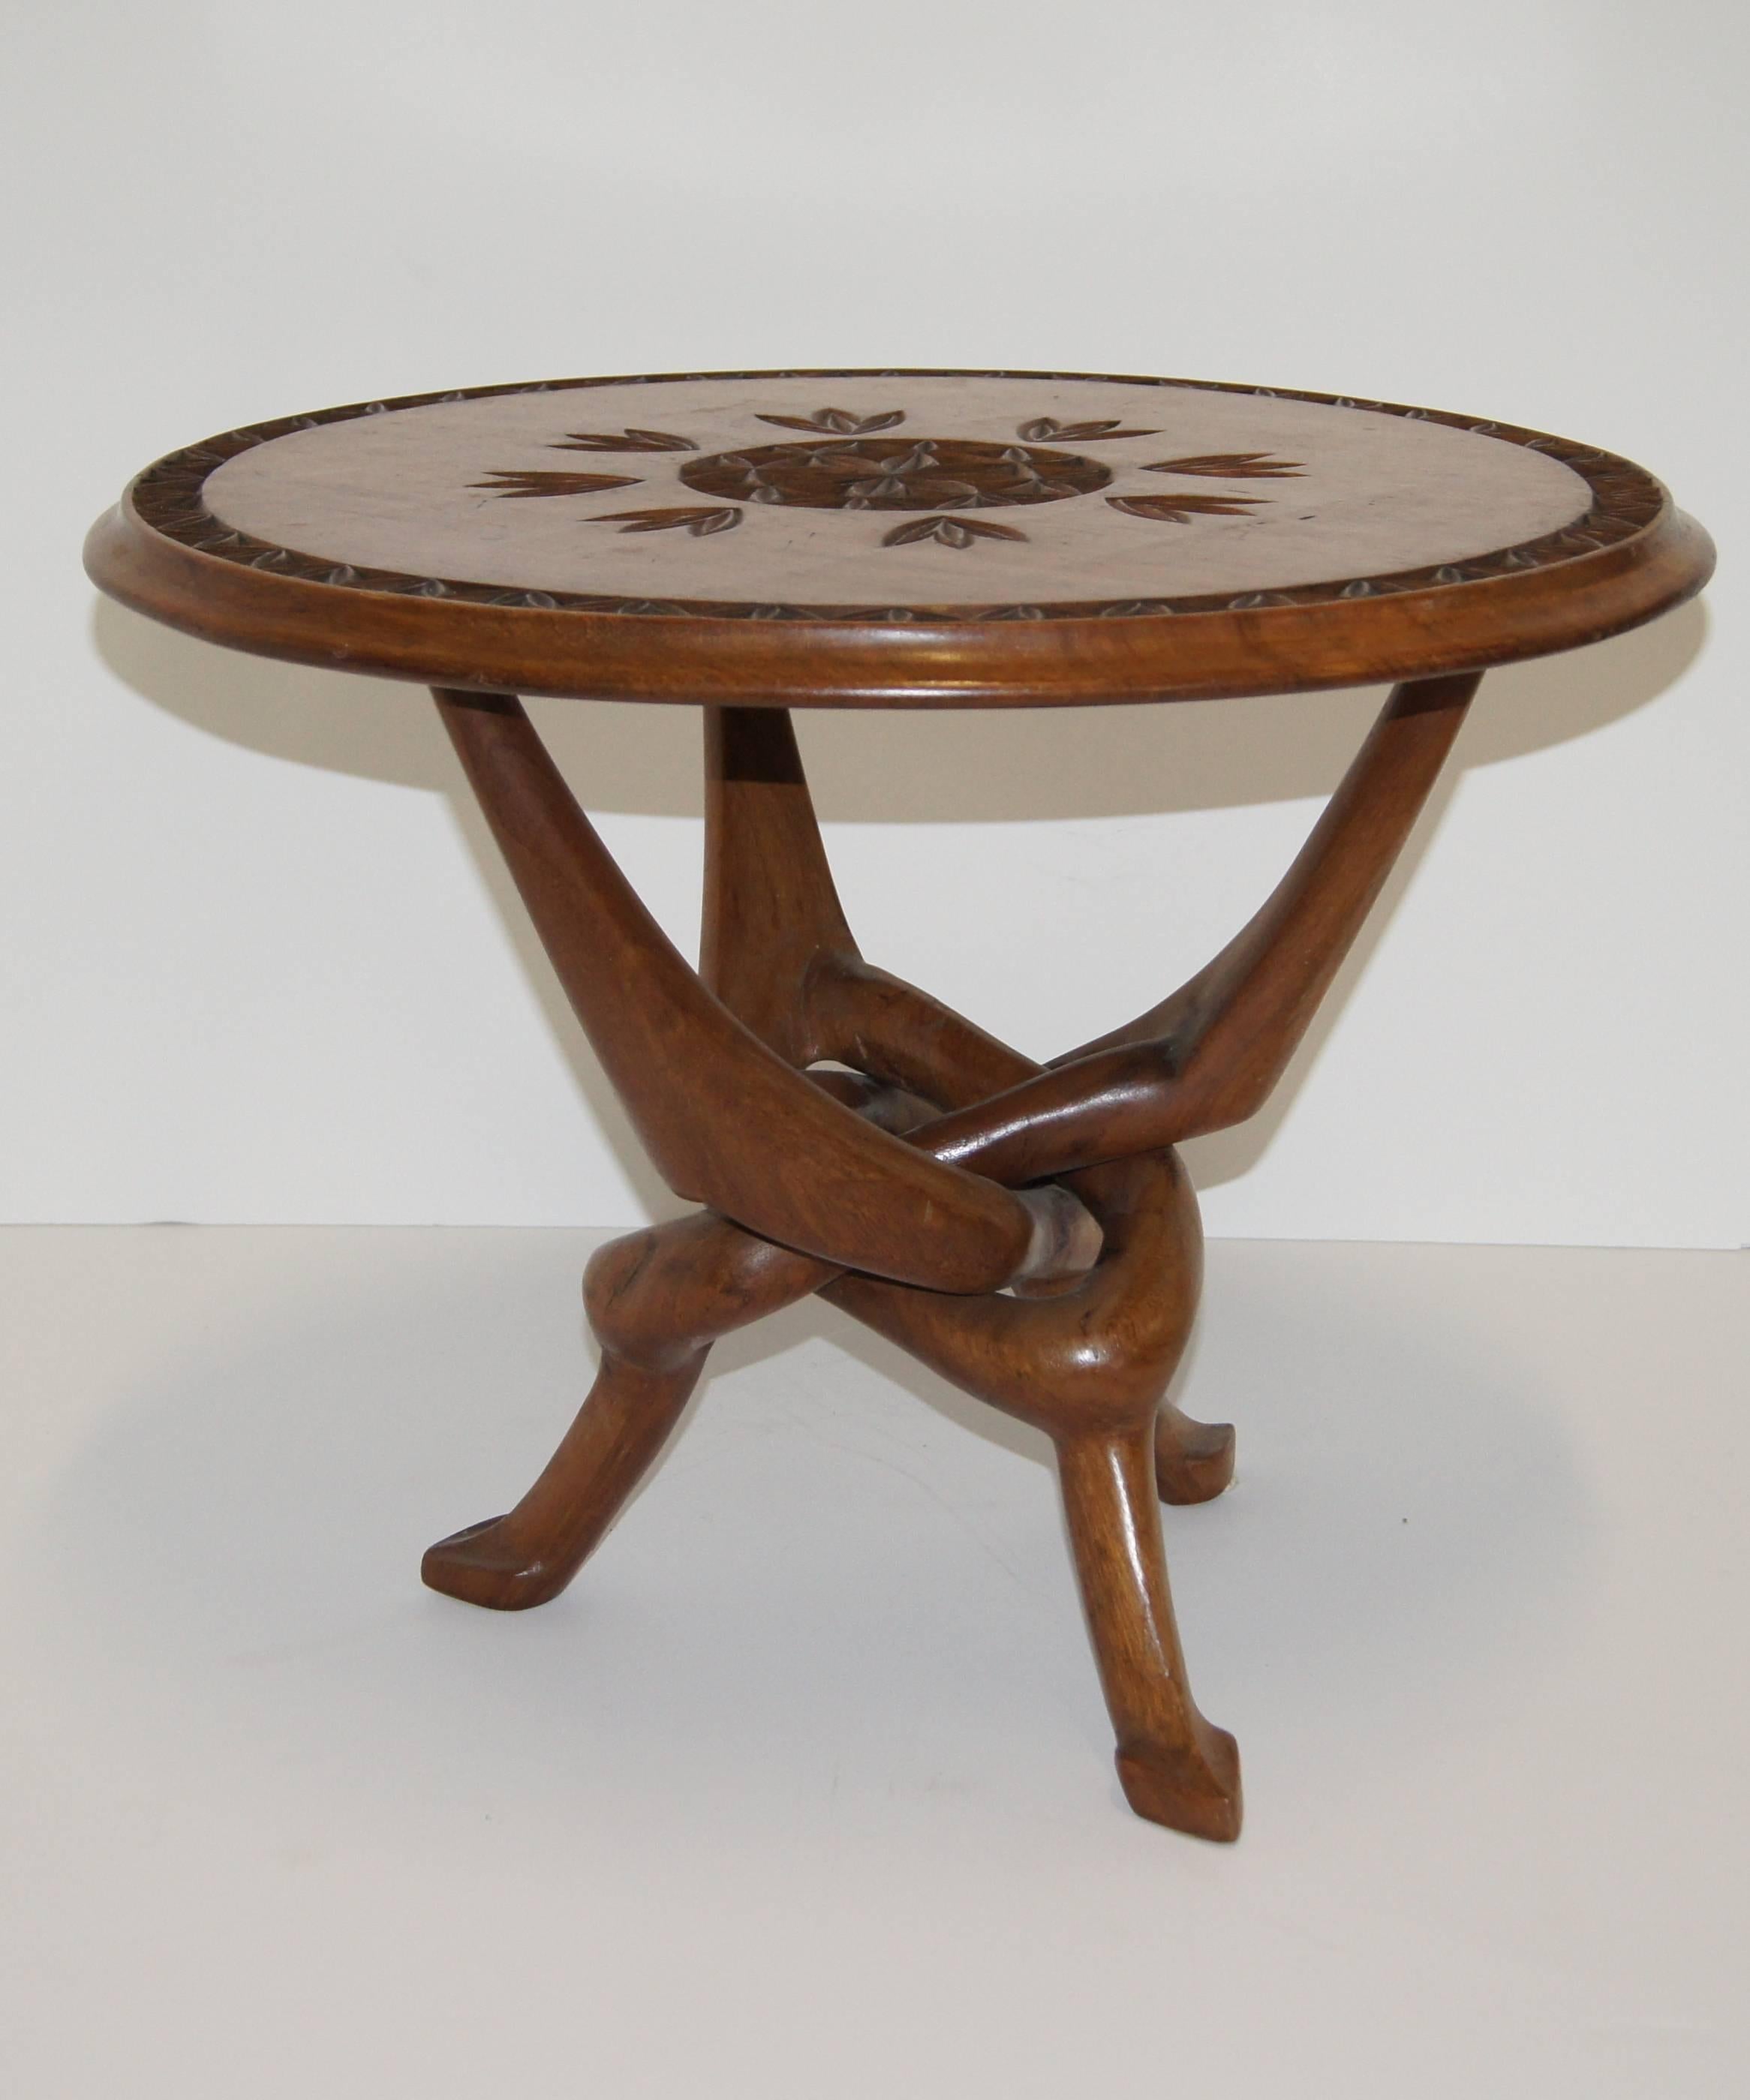 Beautifully carved tripod table with entangled legs that form a knot. Floral carved pattern in the center and side of the tabletop. Rimmed edge.
  